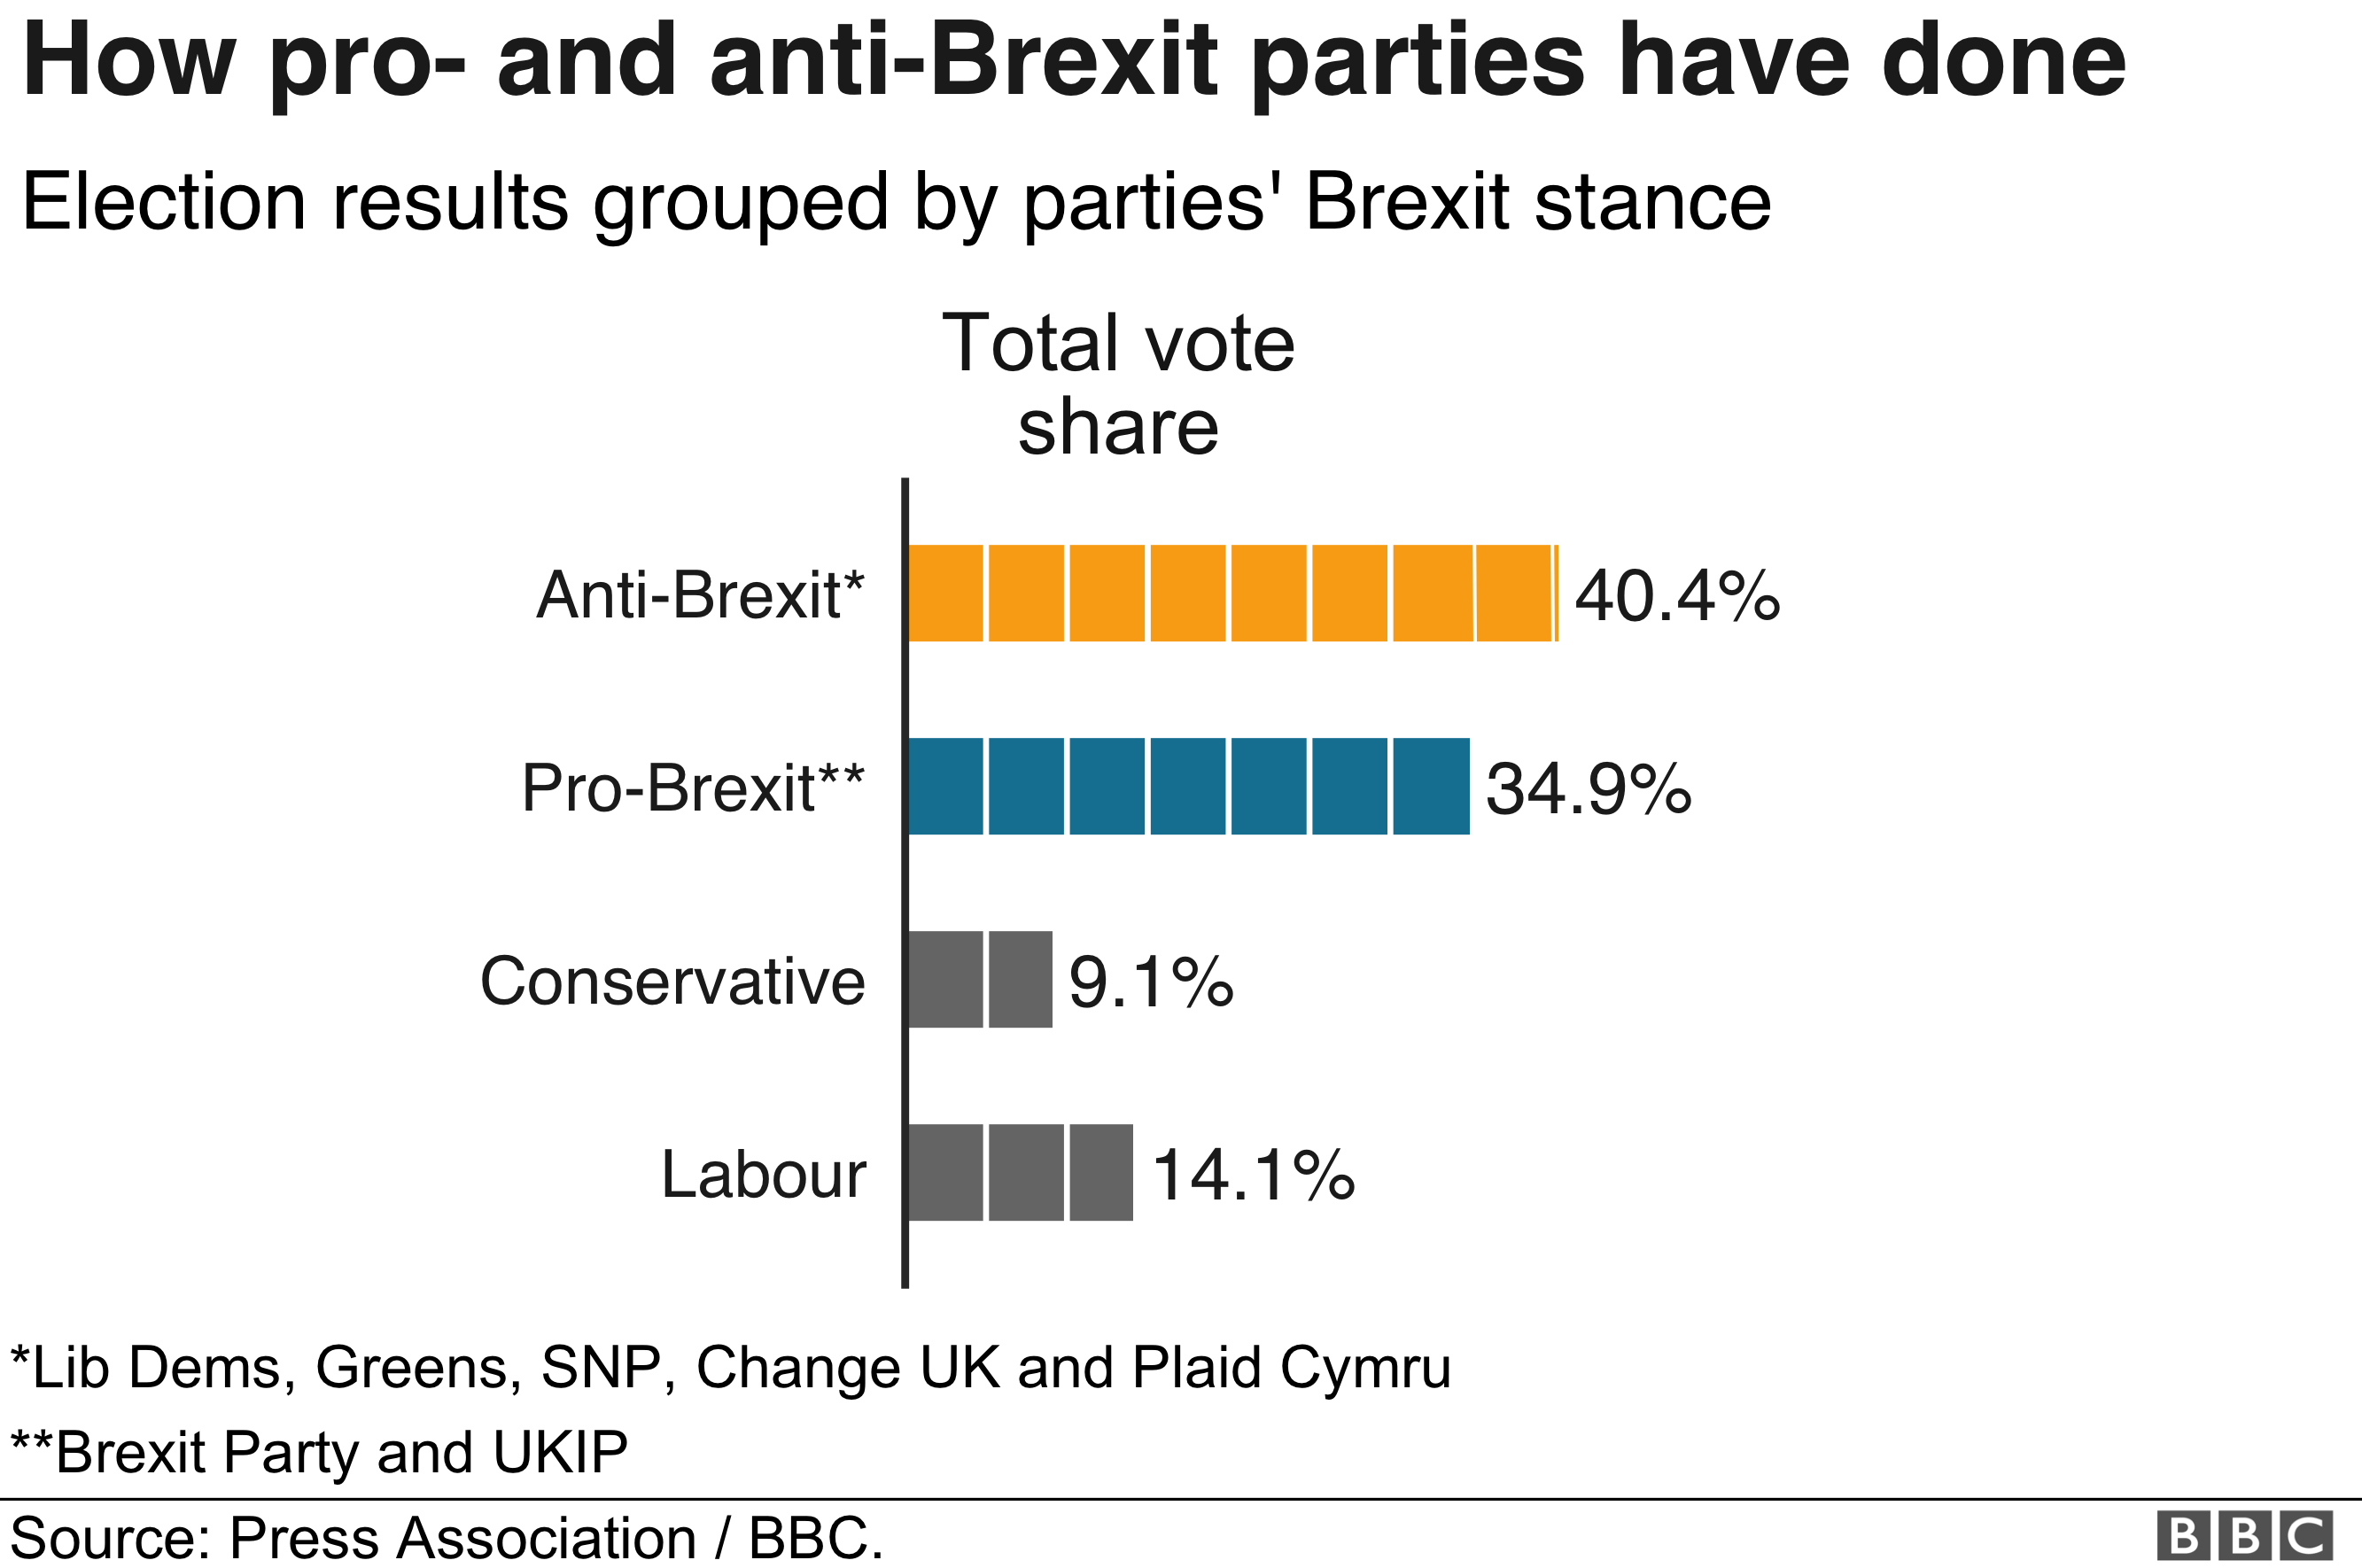 How pro-Brexit (34.9%) and anti-Brexit parties have done (40.4%)